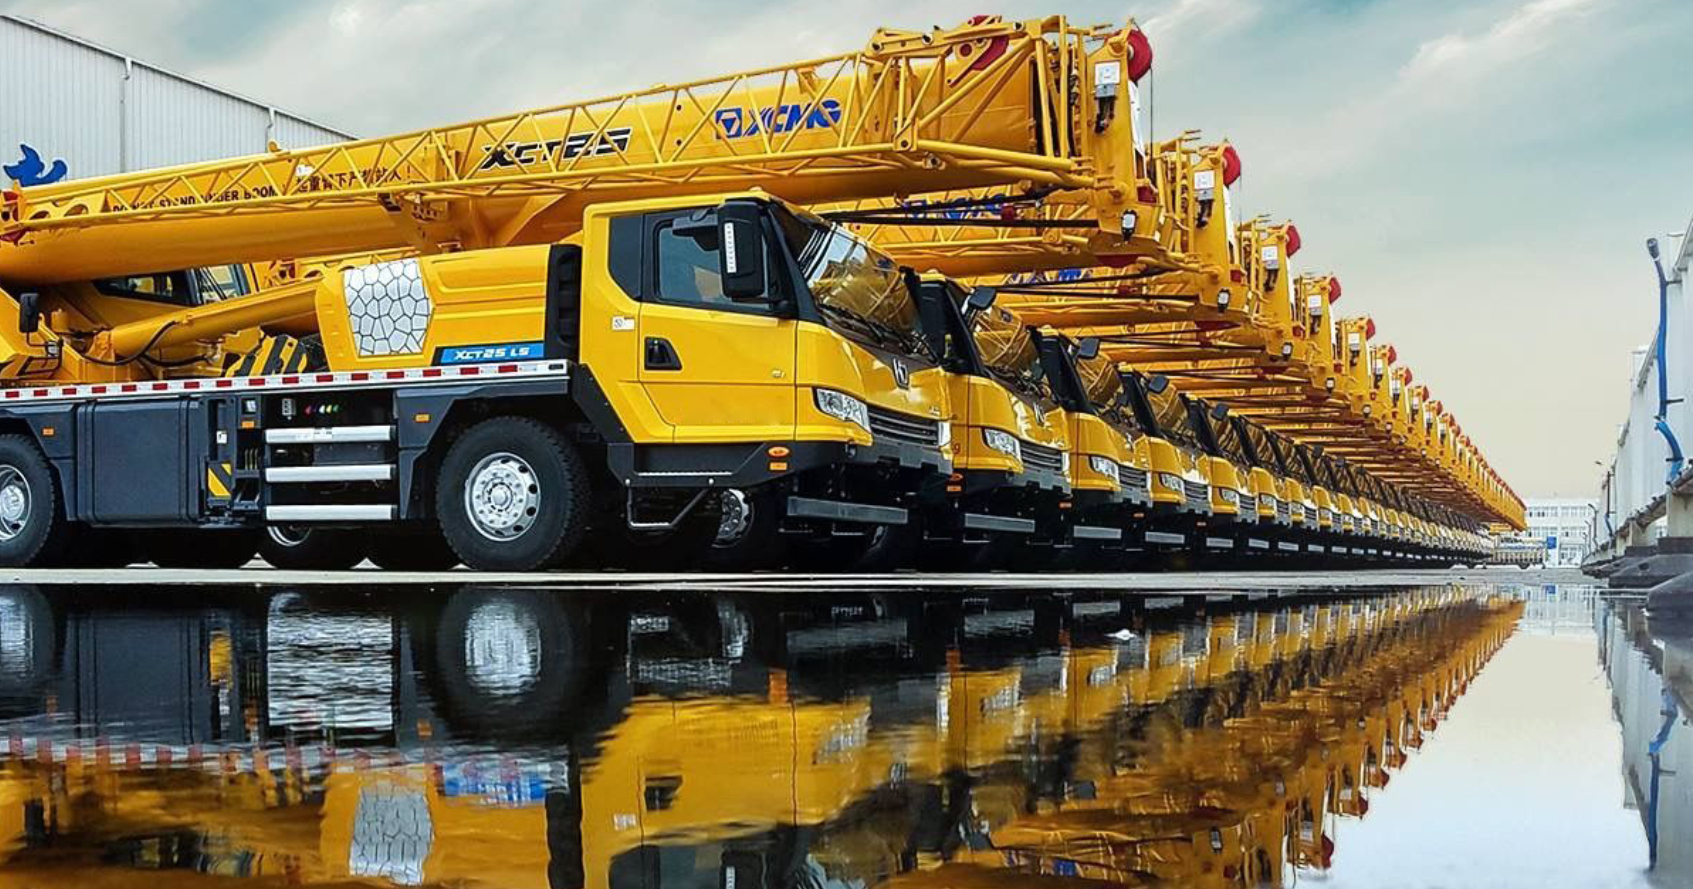 Learn the difference between self-propelled cranes and specialized cranes